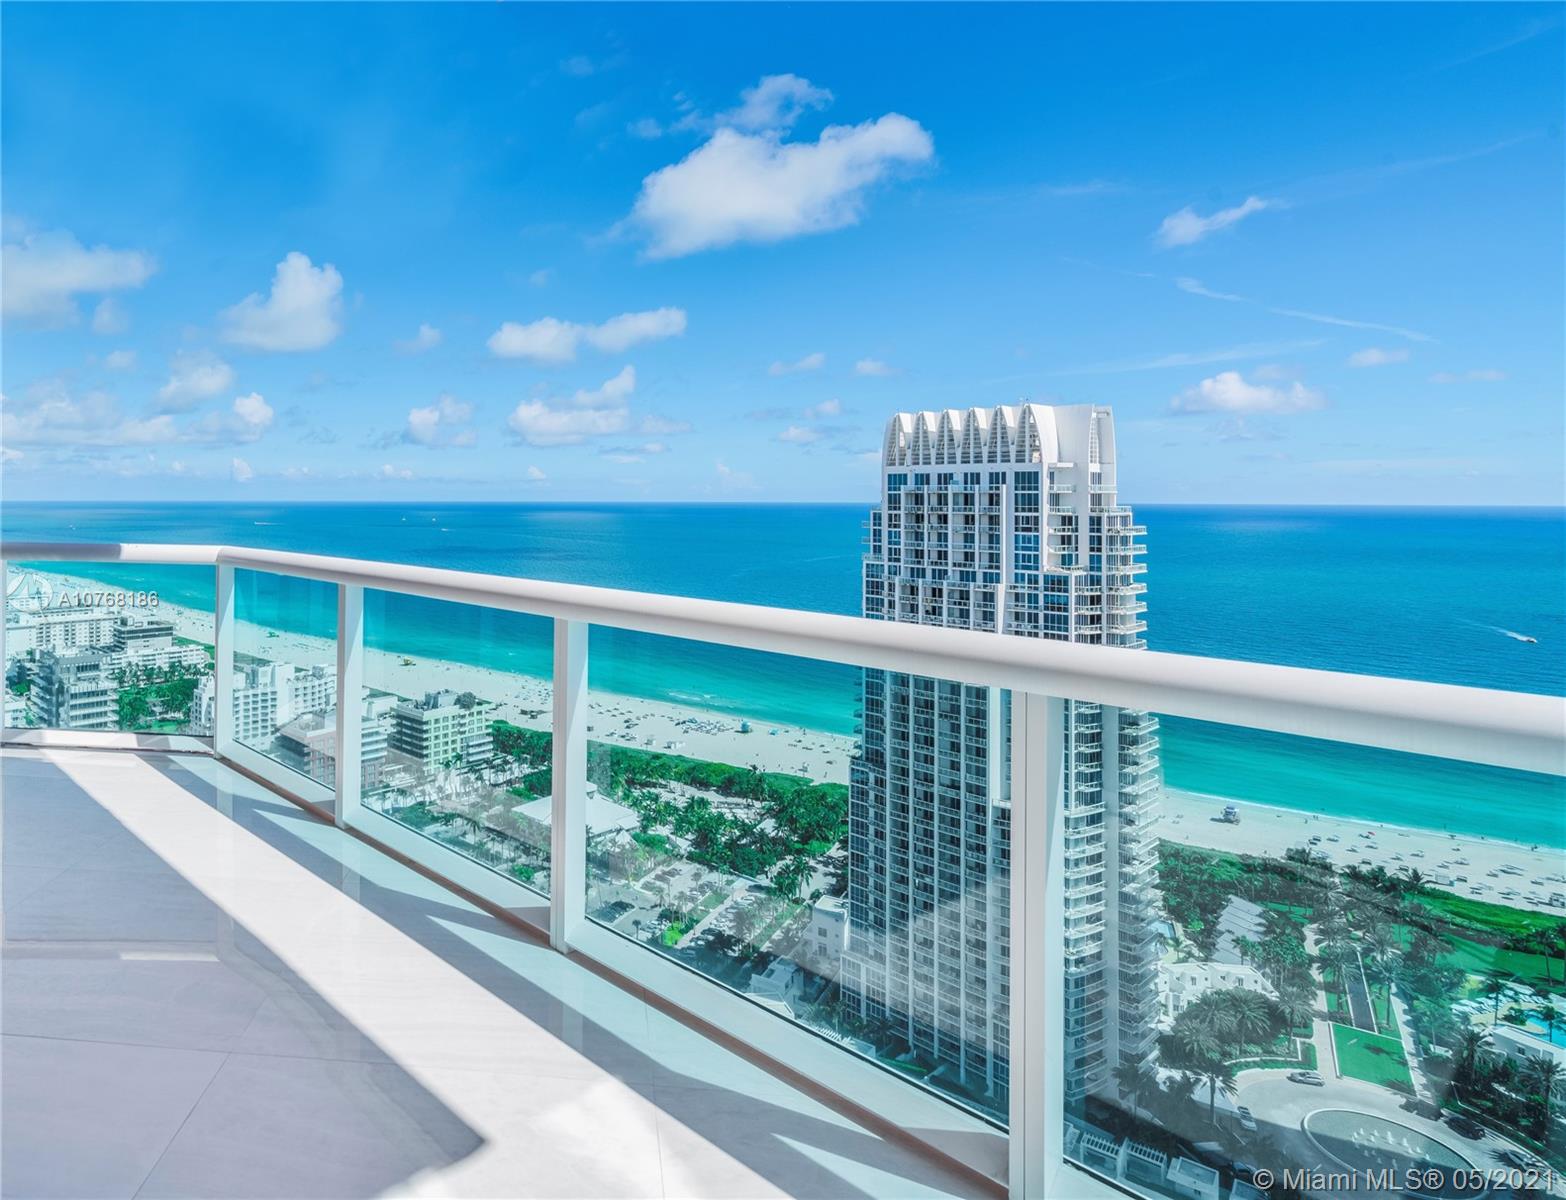 This extraordinary, contemporary-style smart home in the sky is an innovative work of art. This custom designed unit is brand new & fully furnished by iconic Italian luxury brand Visionnaire. Comprised of 2 units meticulously combined to form one impeccable 4,800 sf residence with breathtaking ocean, bay, Miami skyline & sunrise & sunset views. Features include, a flow-through layout, white onyx gloss floors, Vegan stingray leather finishes on the doors & walls, marble bathrooms, Manooi chandeliers, wet bar w/ Rolls Royce style ceiling lighting, Crestron controls & security camera’s throughout, gourmet kitchen w/ Miele & Viking appliances & a principal suite fit for royalty with a custom Pink Quartz closet, floating tub overlooking the water, retractable projector & 180 degree views